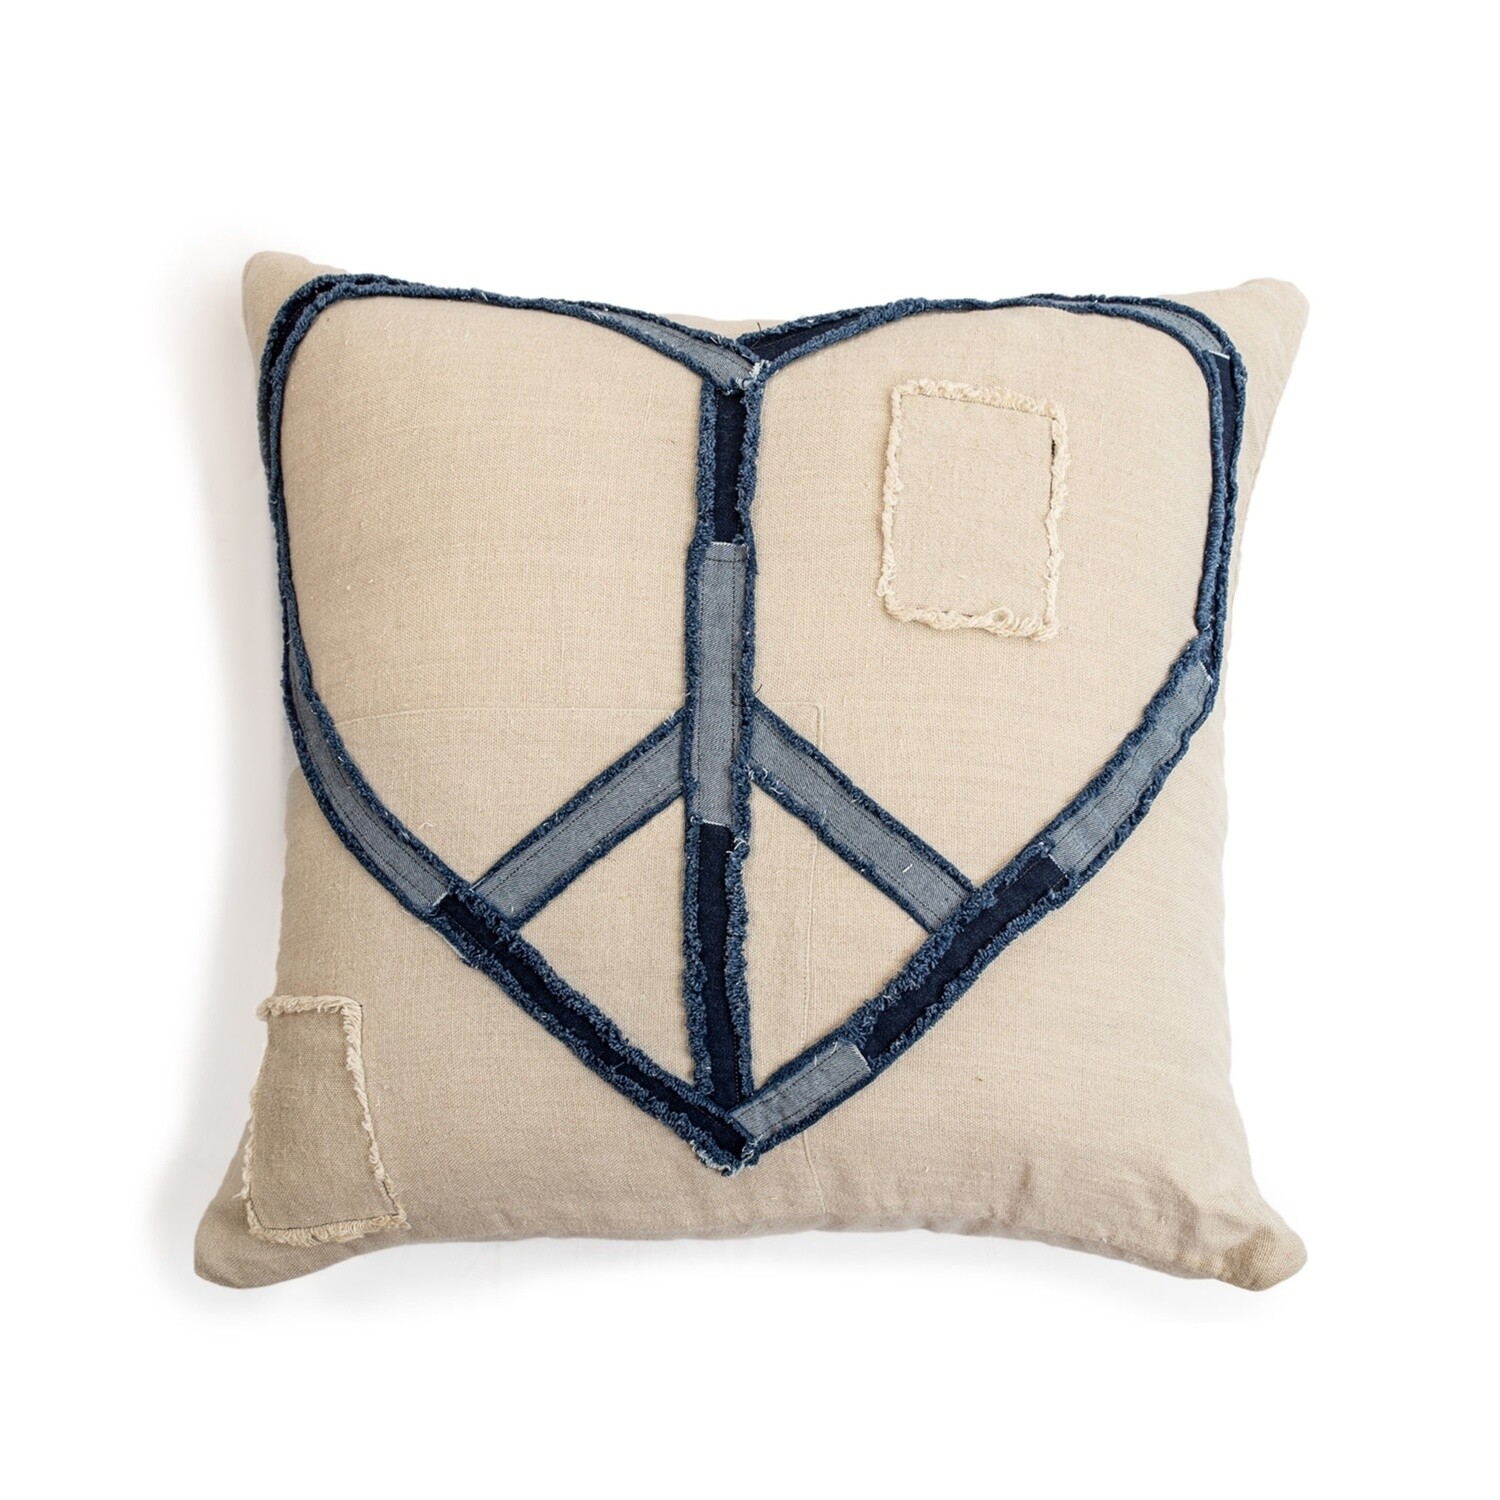 PEACE HEART STITCHED PILLOW